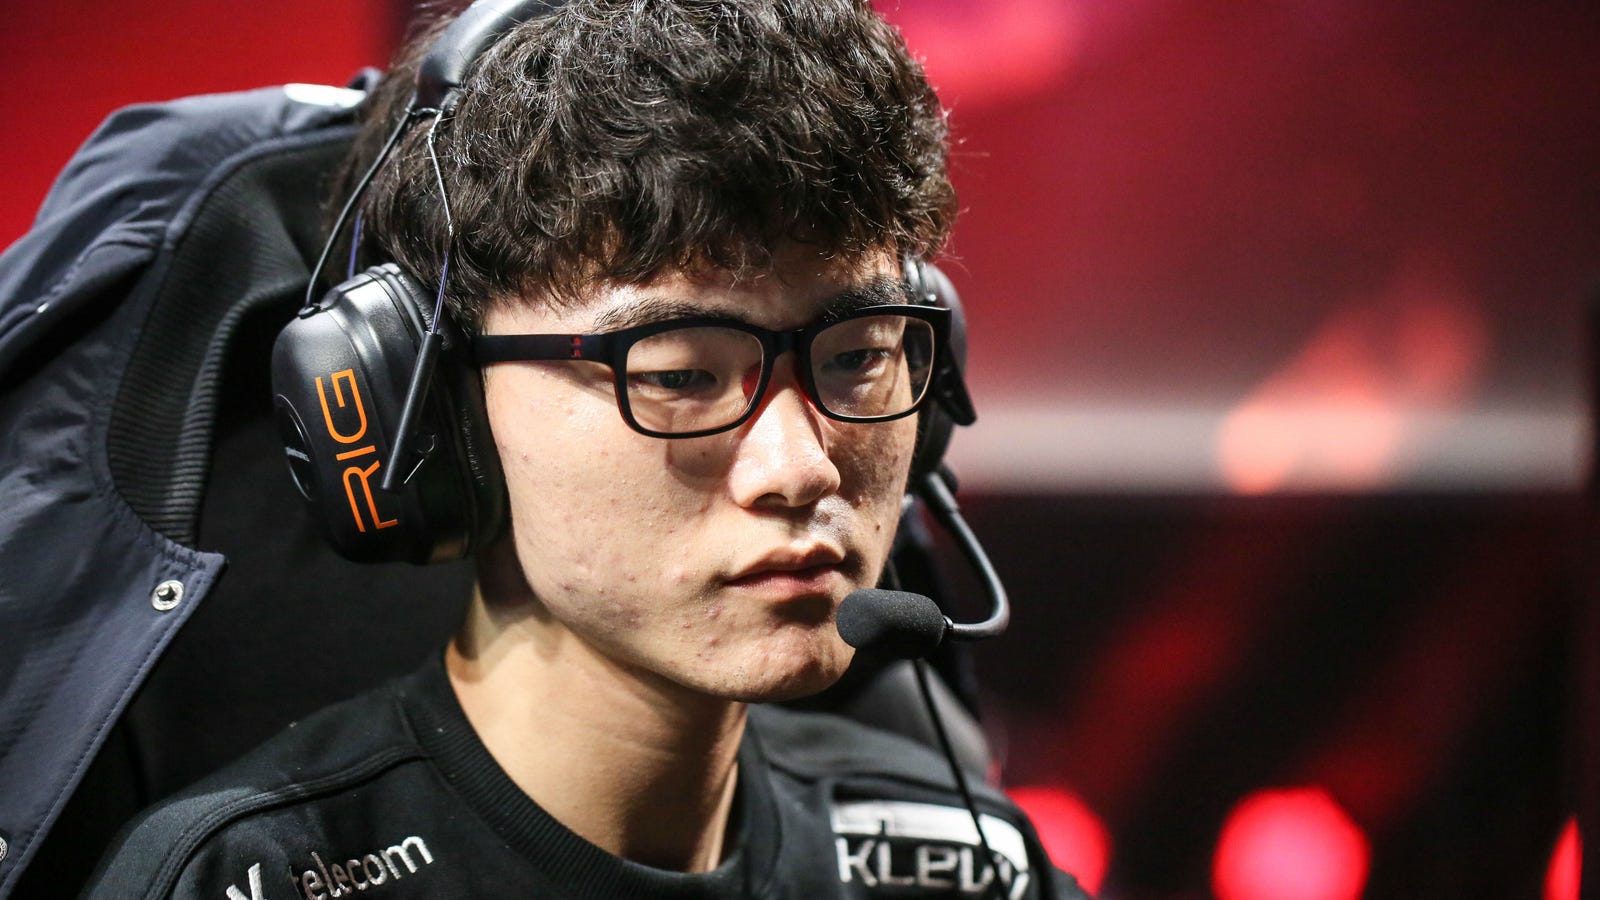 The World's Best League Of Legends Player Knows No Mercy